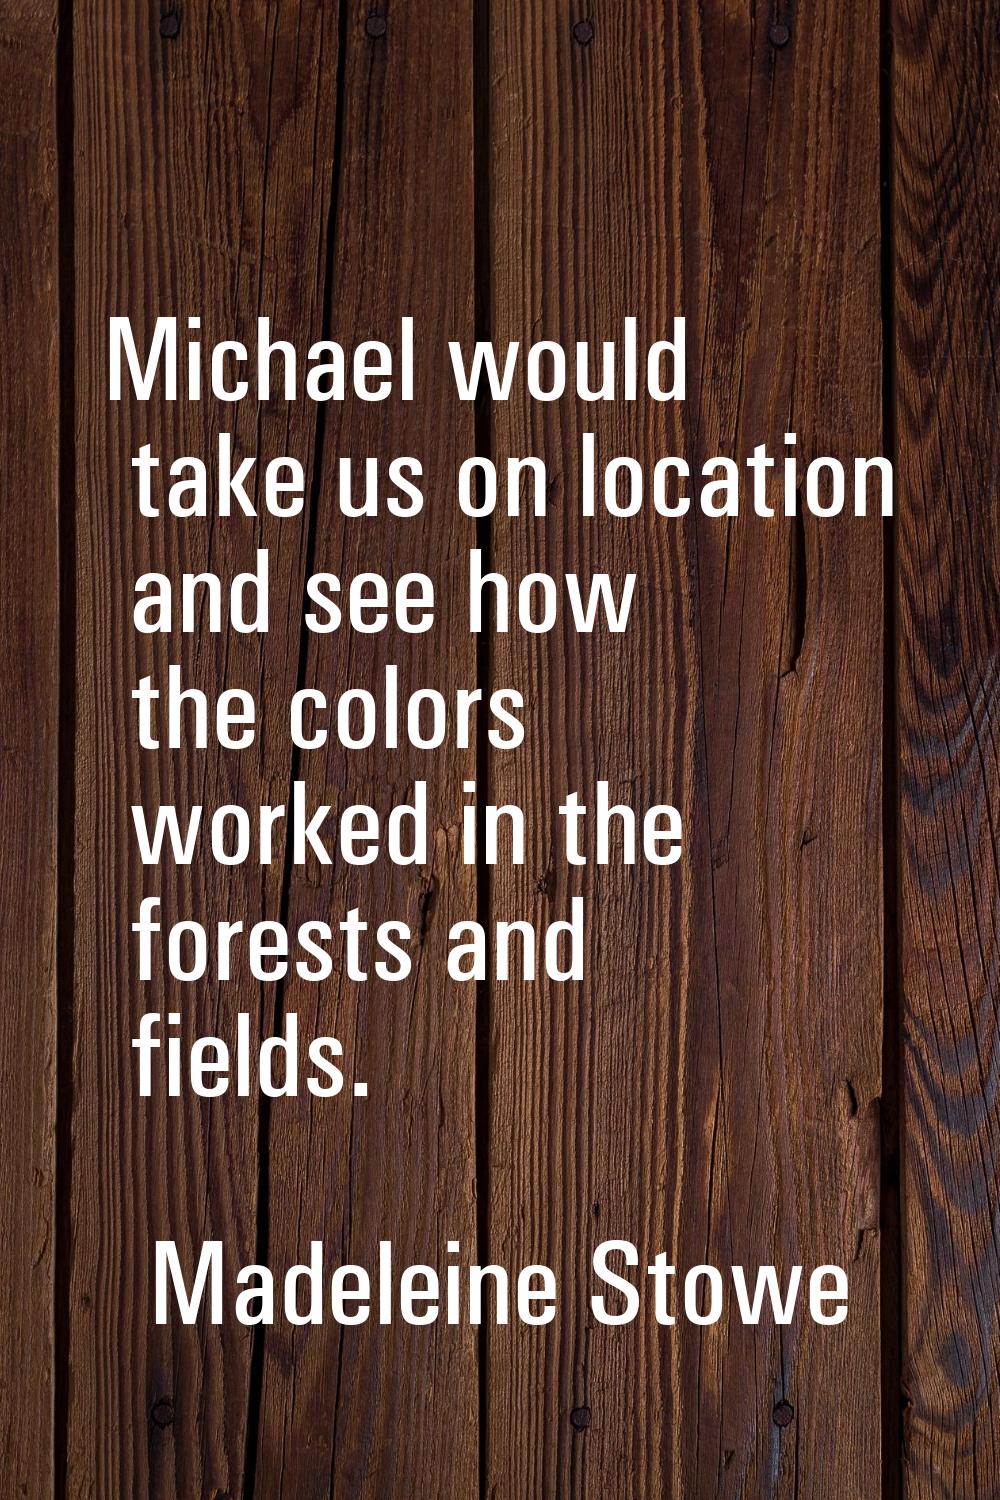 Michael would take us on location and see how the colors worked in the forests and fields.